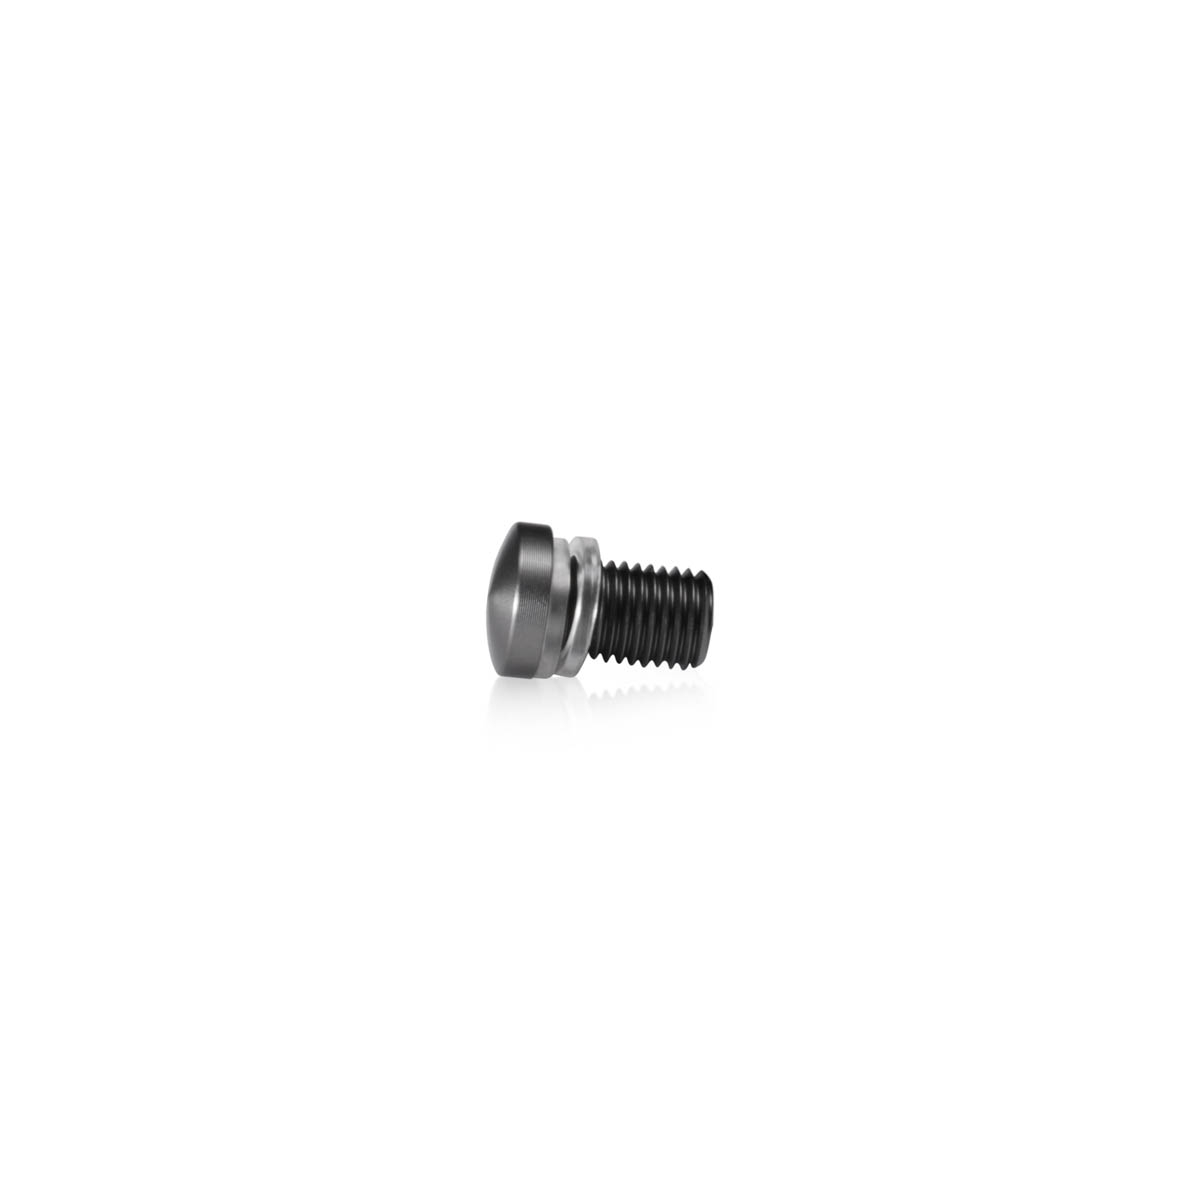 AL12-12T Head replacement for Mbs-Standoffs 1/2'' Diameter x 1/2'' Barrel Length, Aluminum Titanium Anodized Finish Standoffs (Includes 2 Silicone Washers).